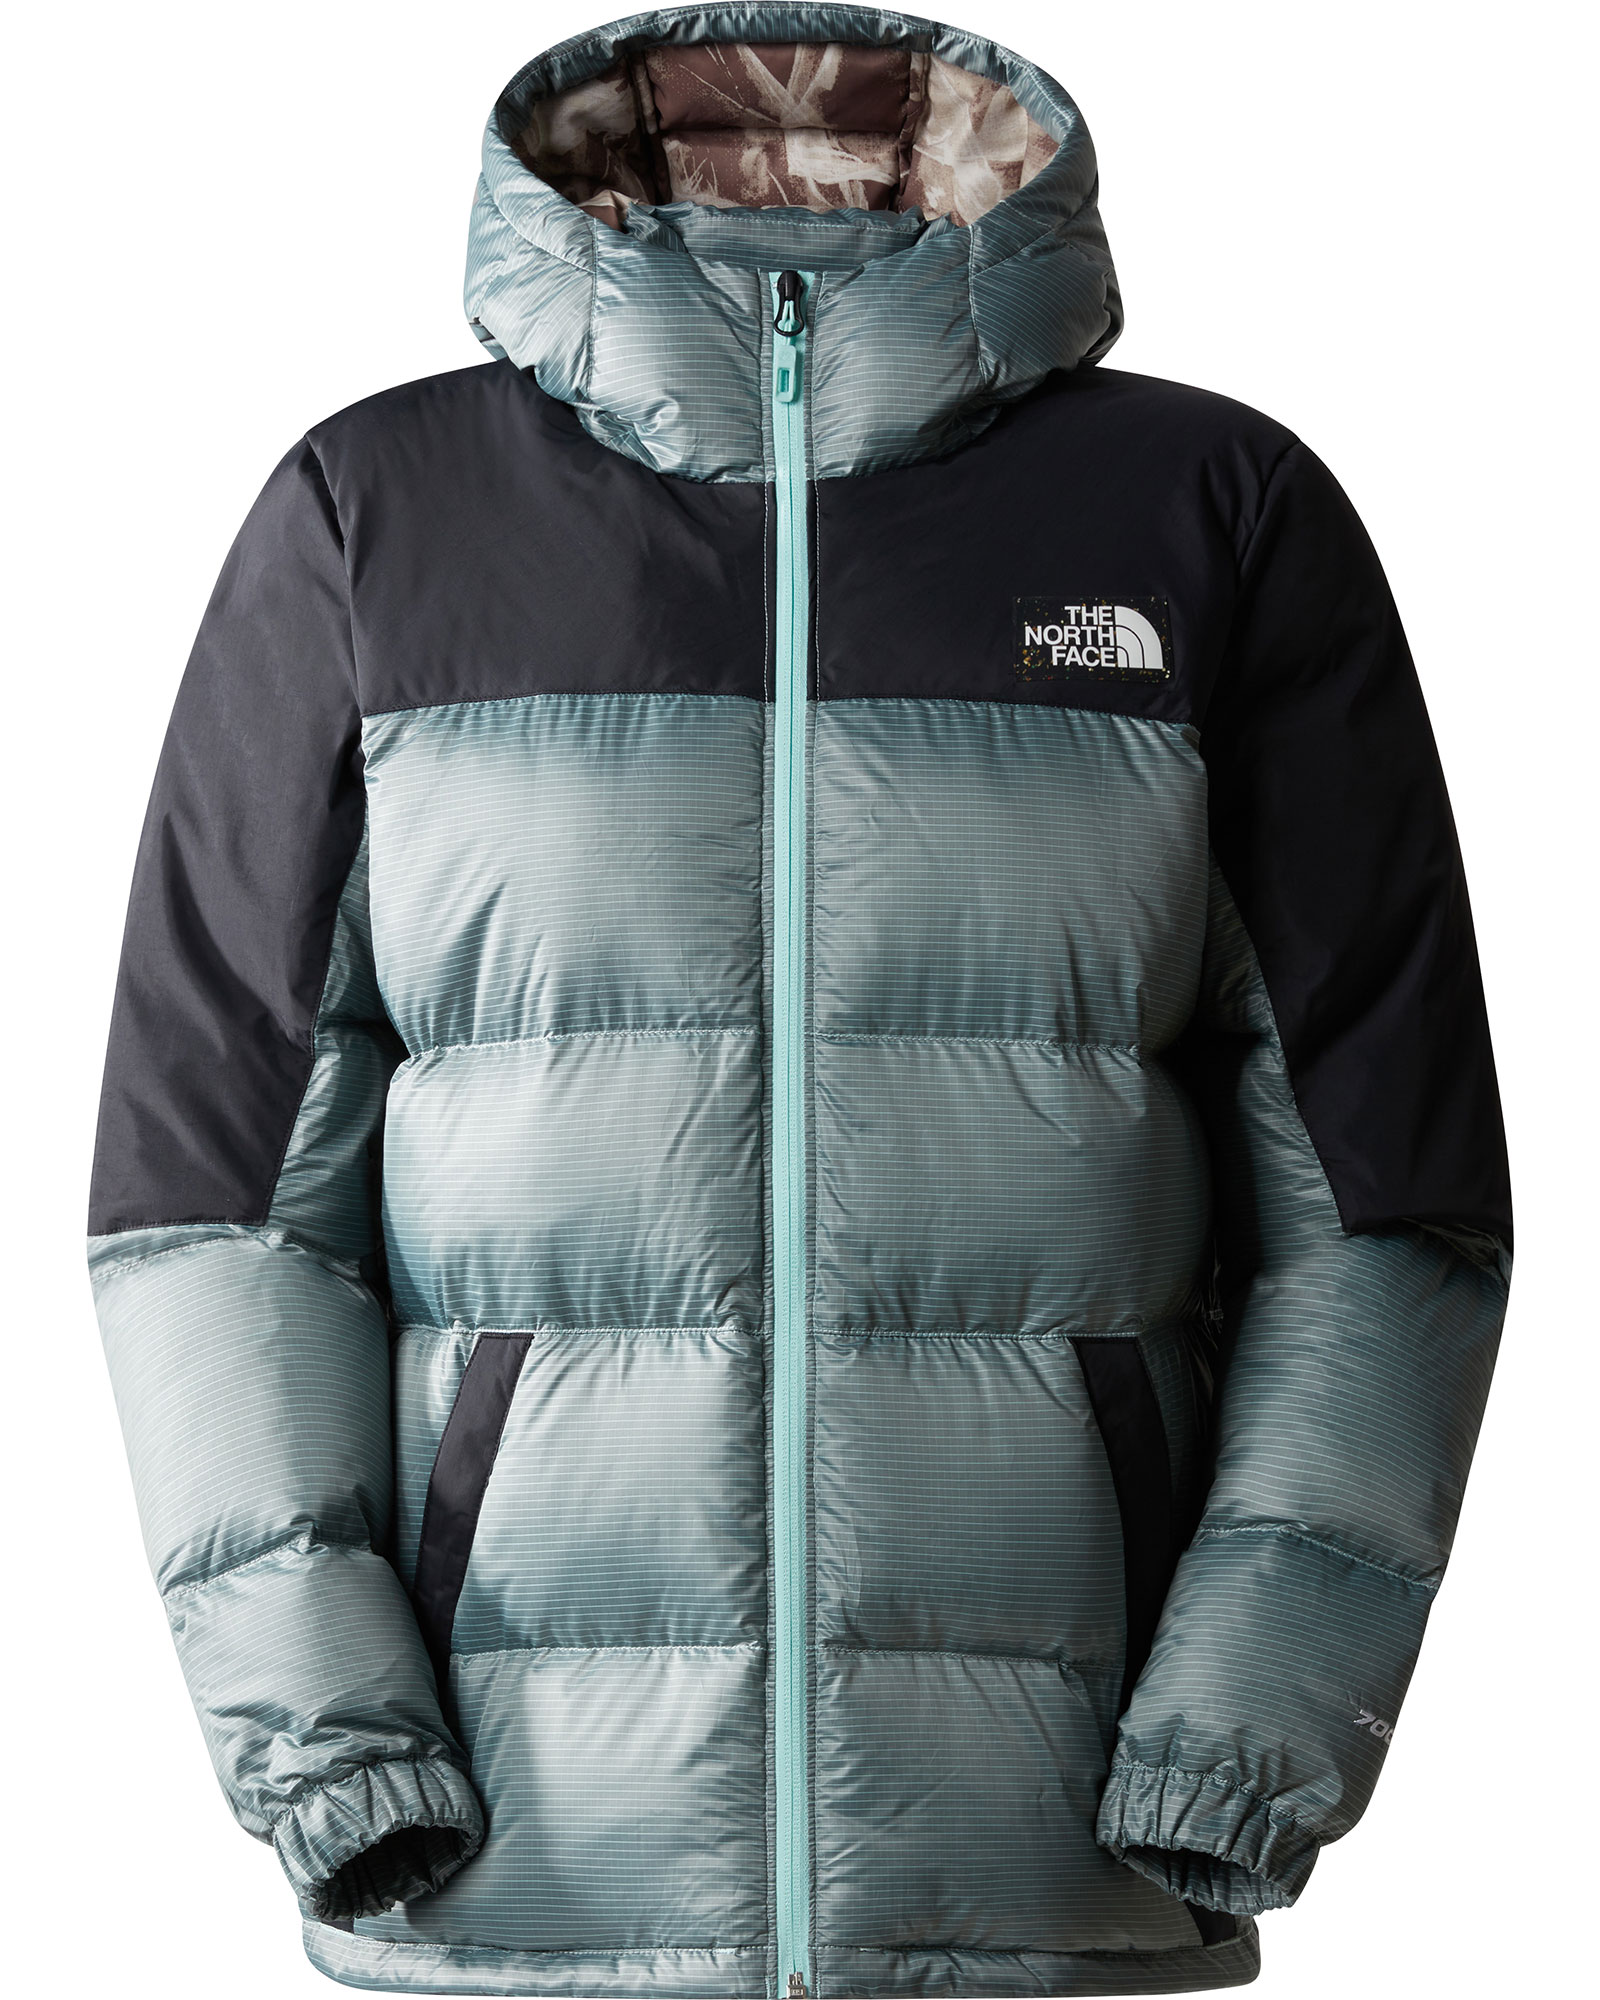 The North Face Diablo Recycled Women’s Down Hoodie - Powder Teal-TNF Black M